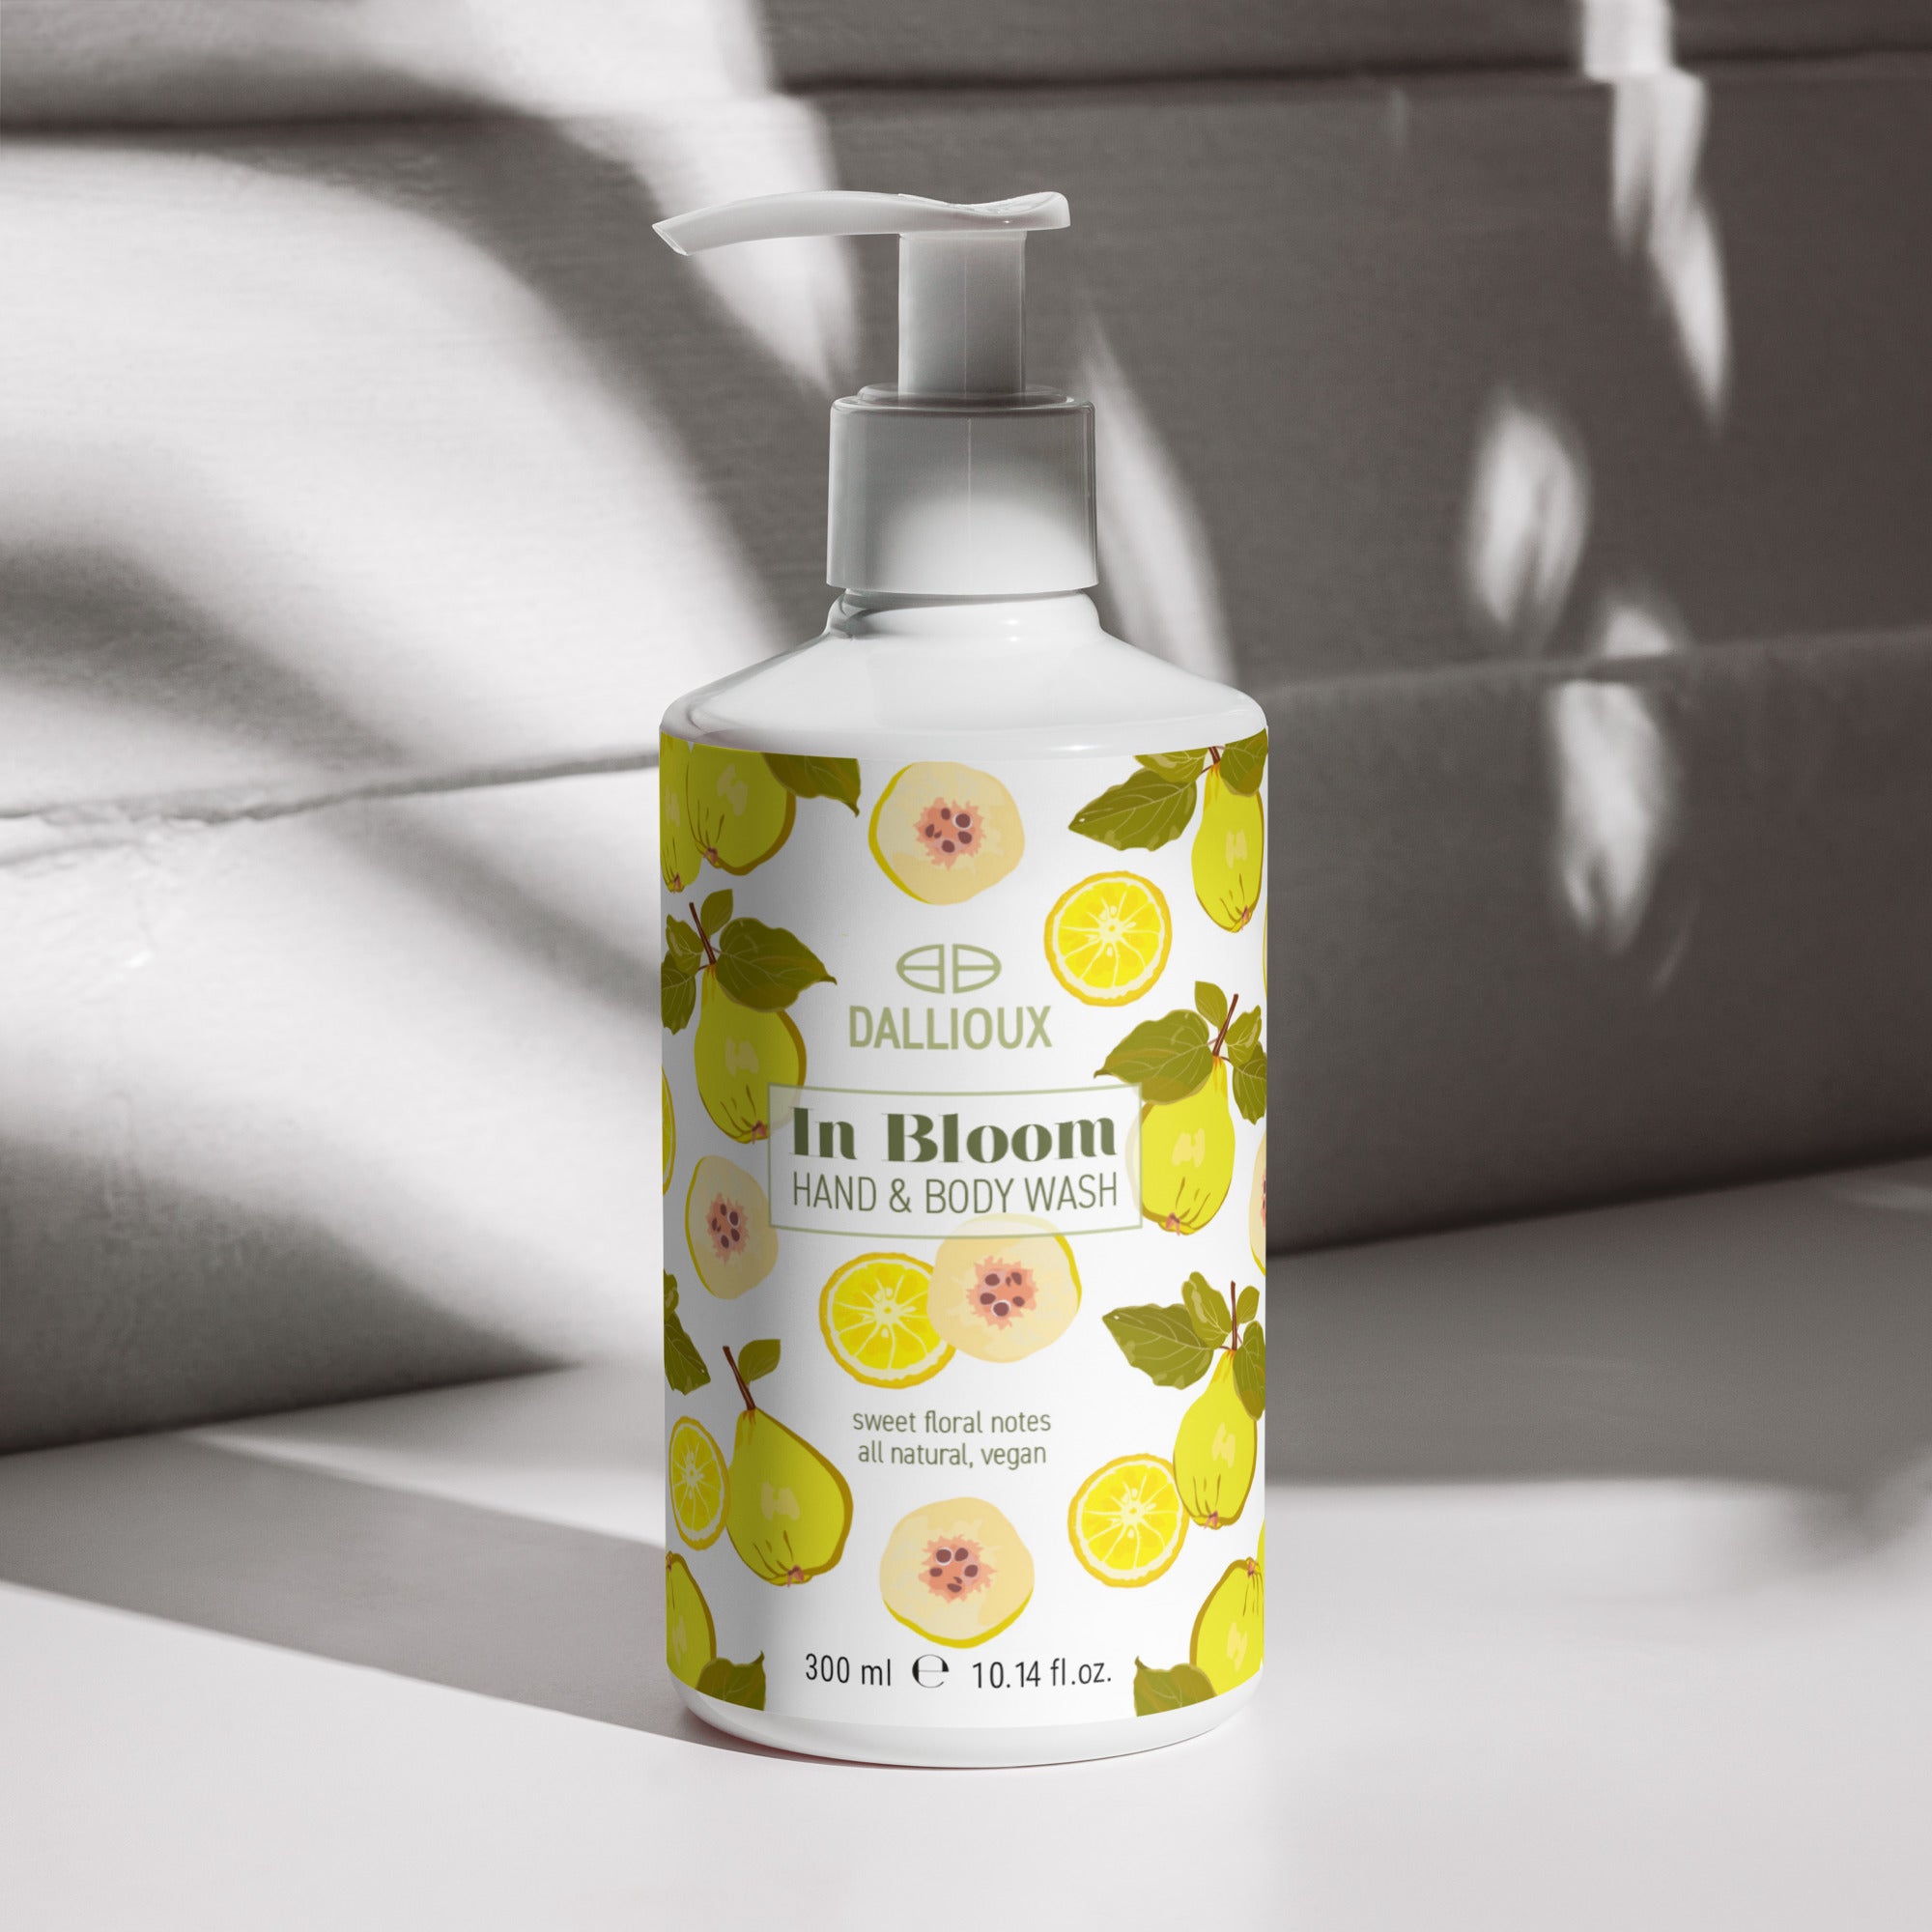 In Bloom Hand & Body Wash